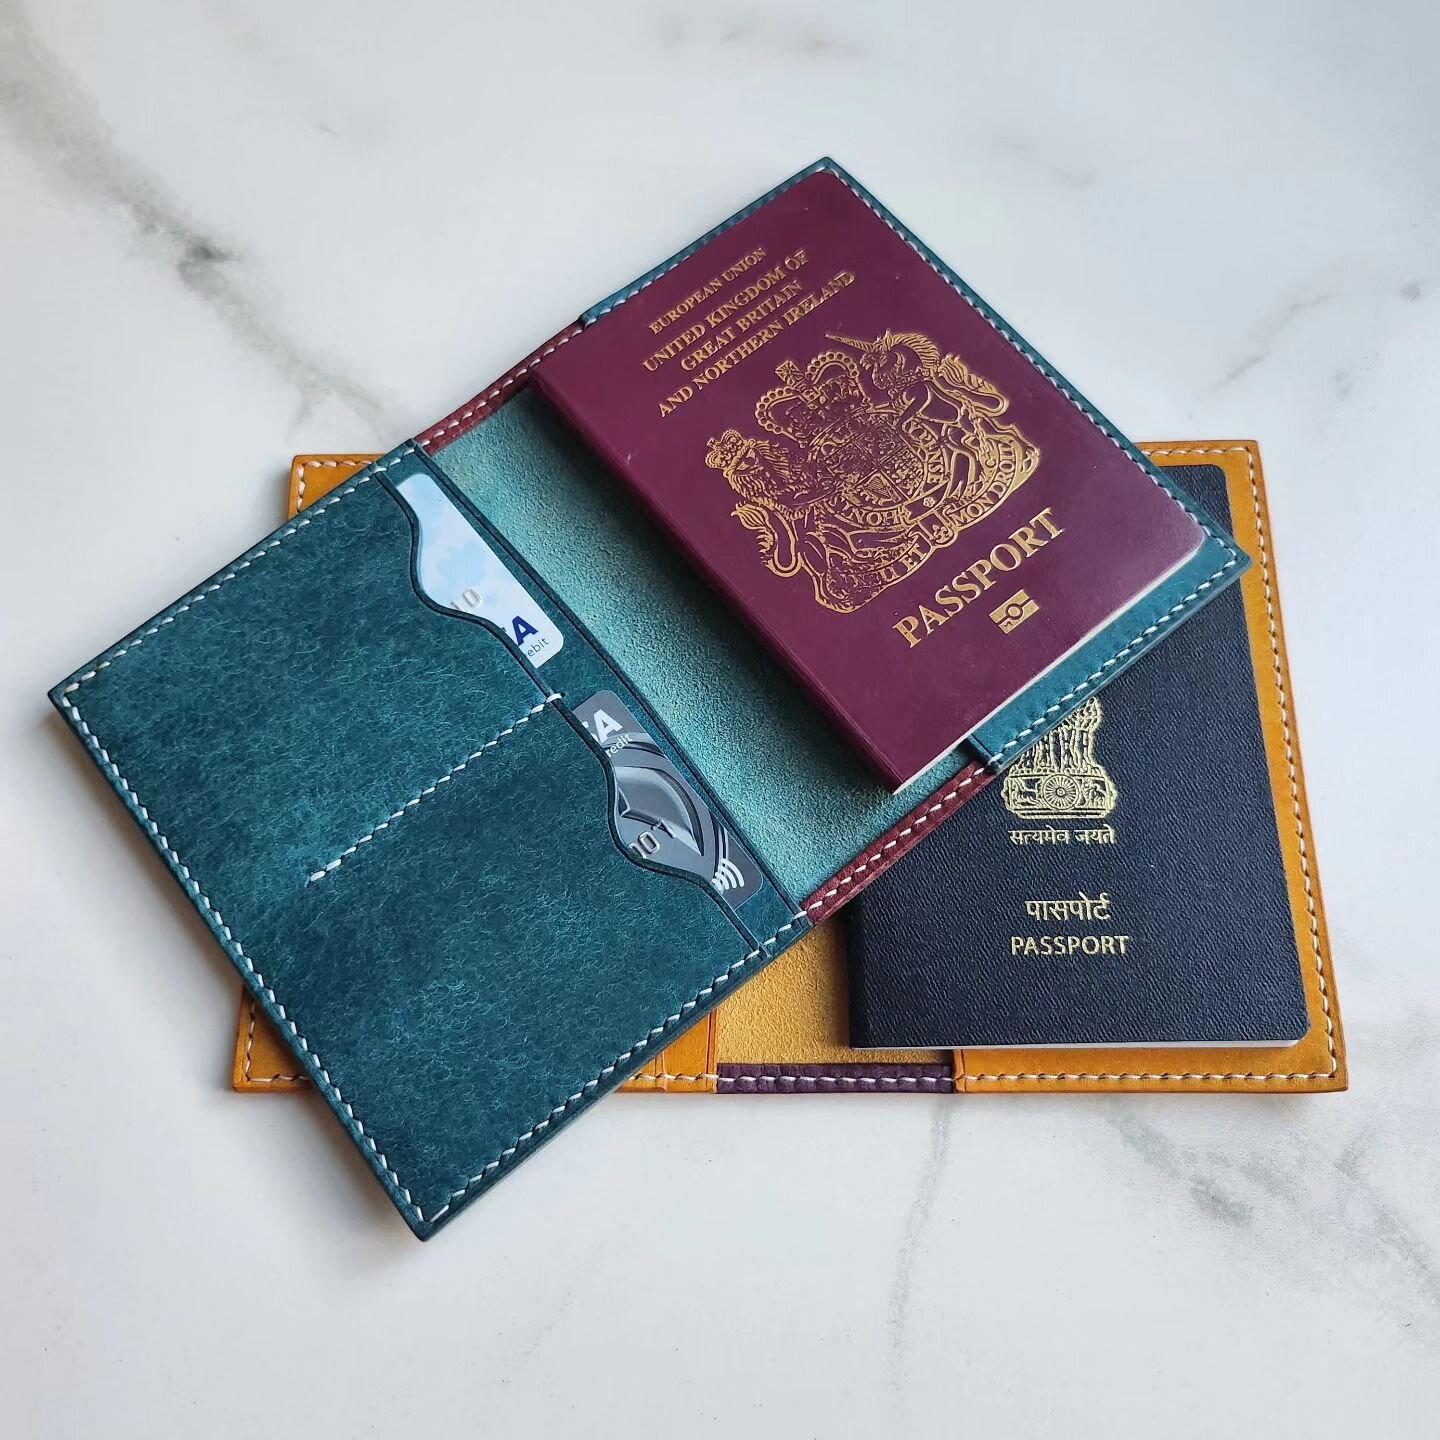 Travel in style with &quot;The Kew&quot; Passport Cover ✈️

The cover comes with additional slots to hold your travel cards whilst making your passport look sleek and elegant ✨️

#signatureoflondon #TheKew #leatherpassportcover #passportcover #stylis